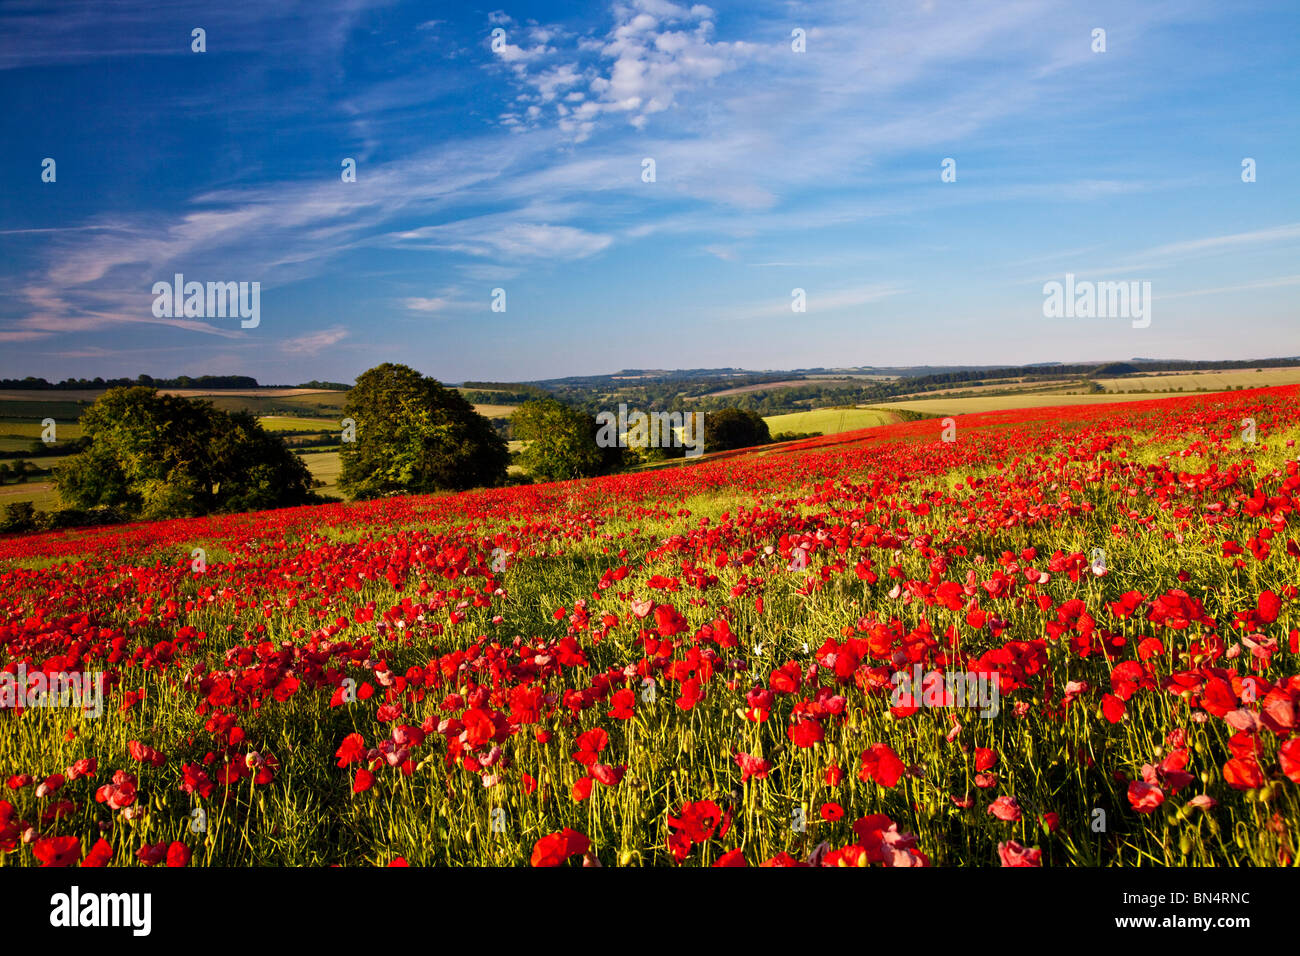 Poppy fields in early morning sunshine on the Marlborough Downs, Wiltshire, England, UK Stock Photo